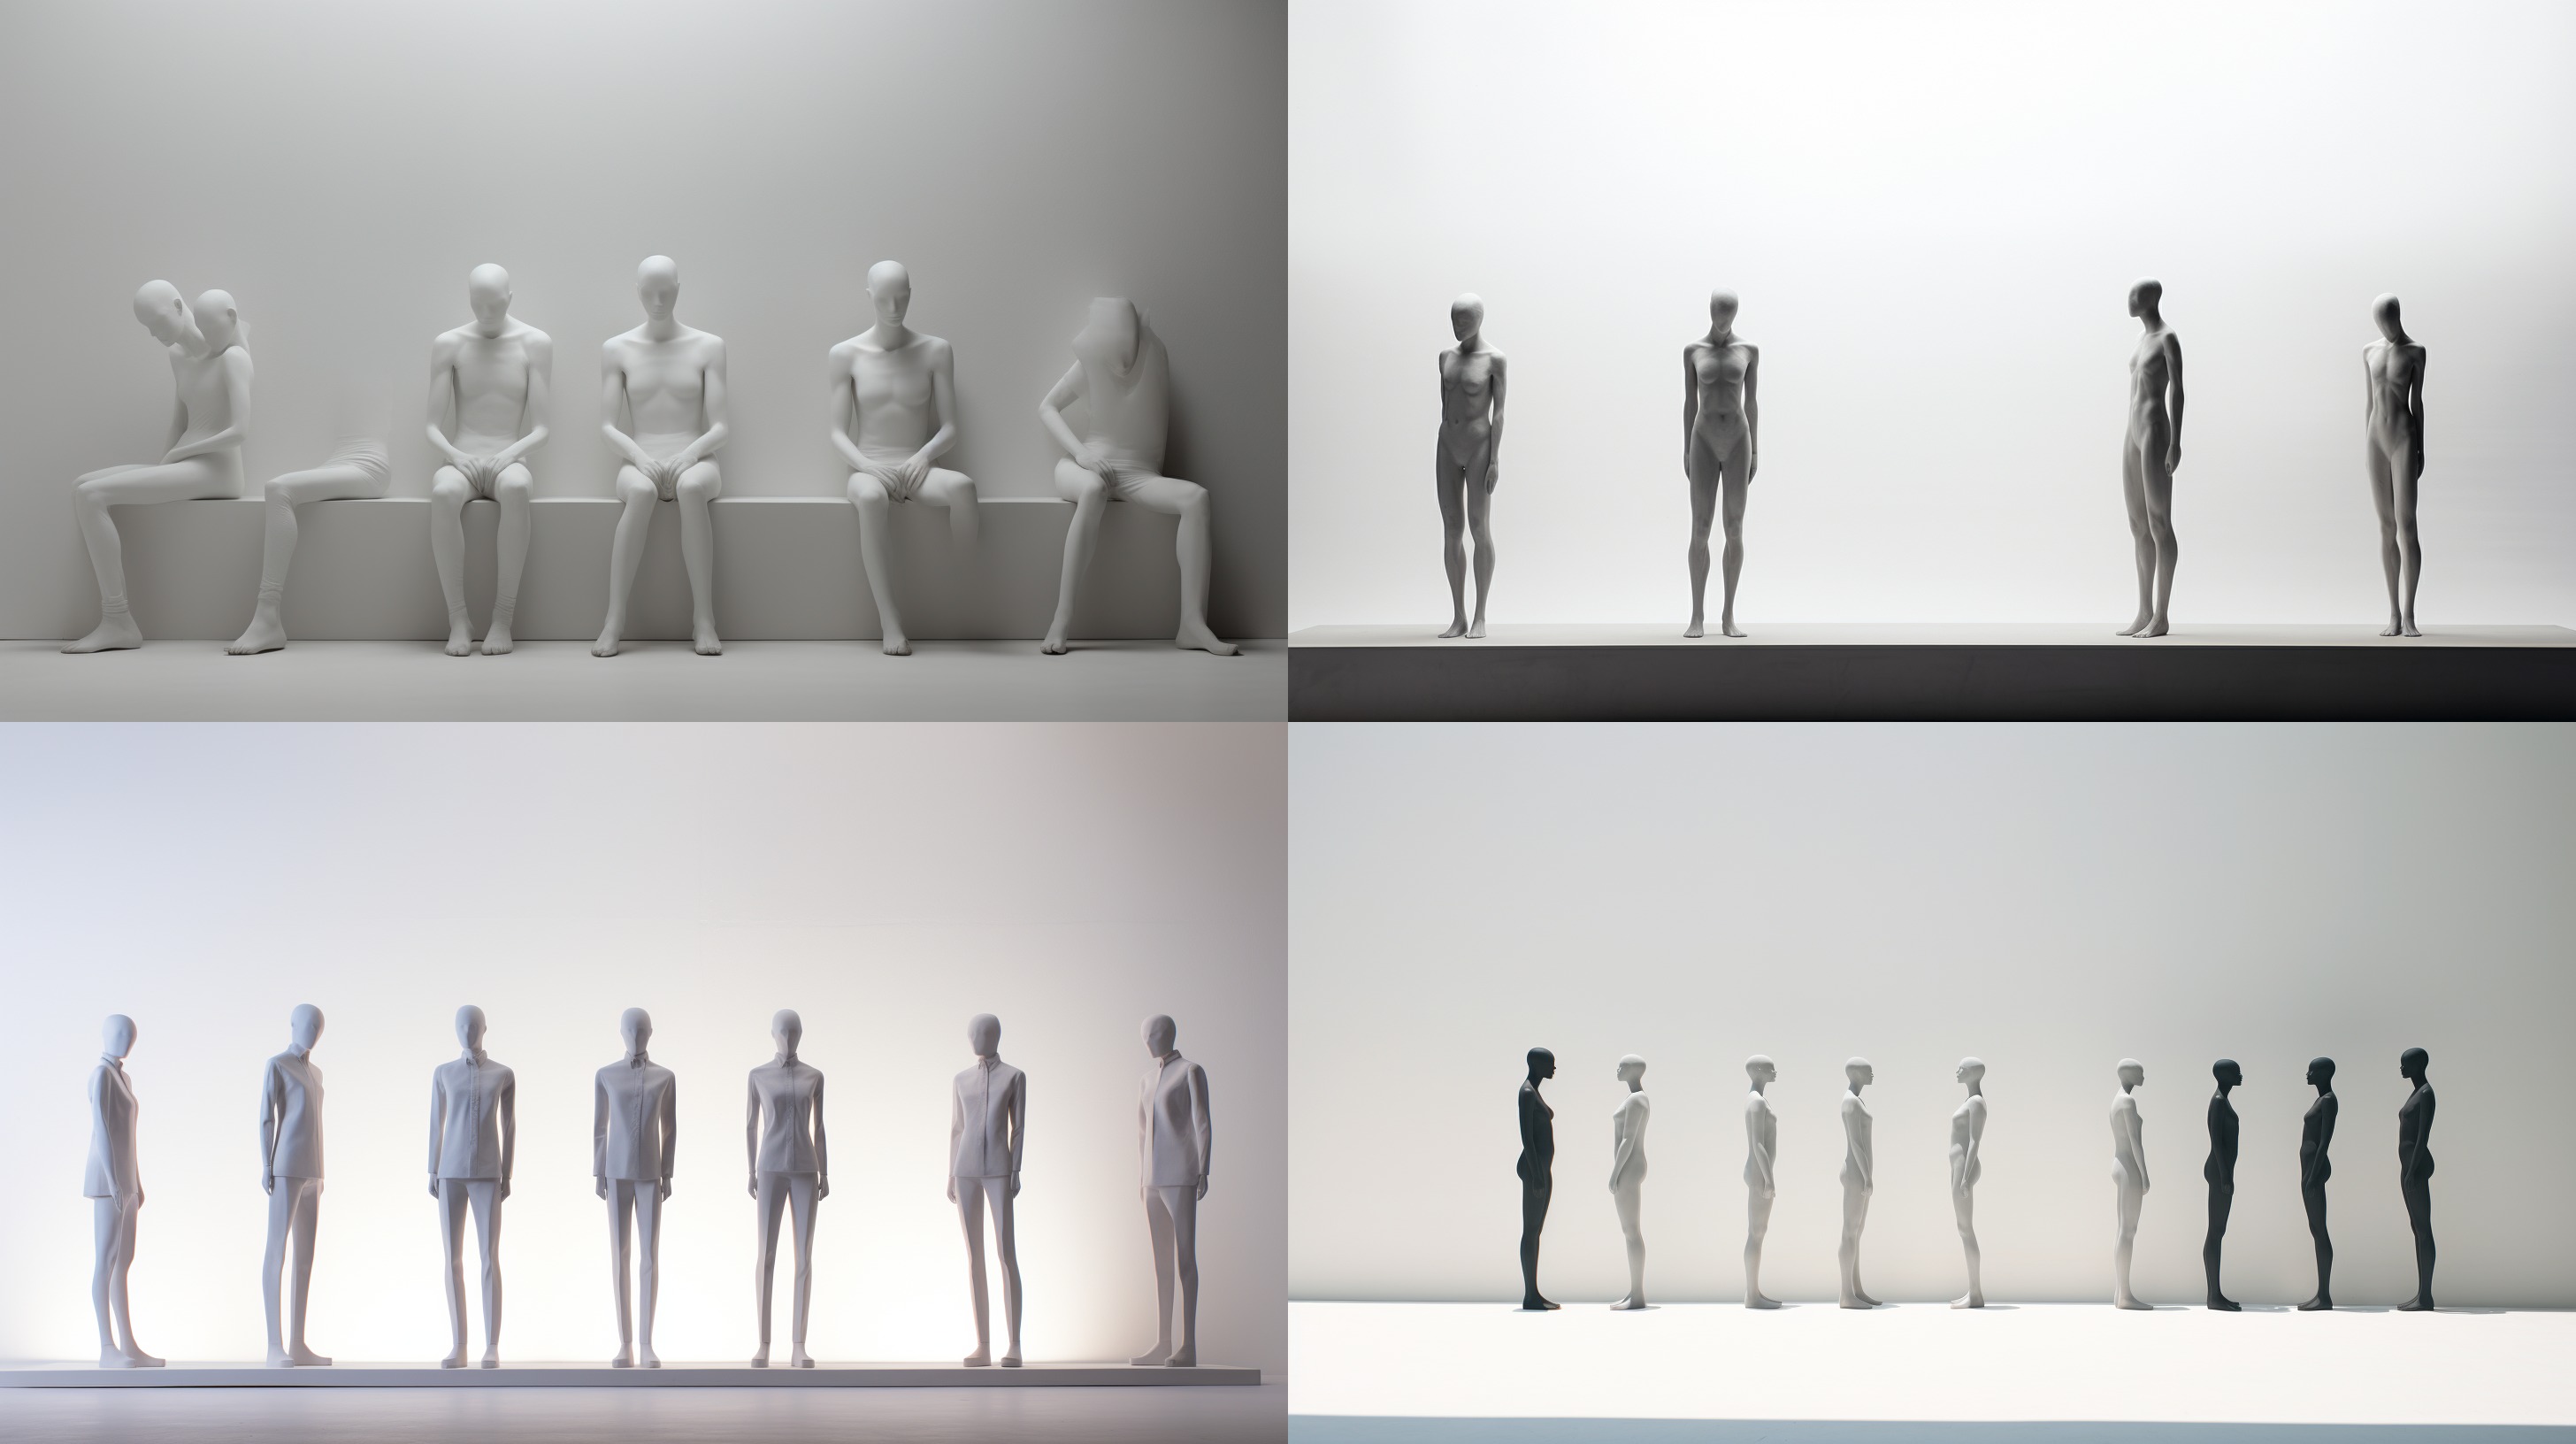 timmcclane_people_minimalist_sculpture_made_by_Javier_Marin_and_3615d995-1a83-4c74-80fa-84b4036265d3